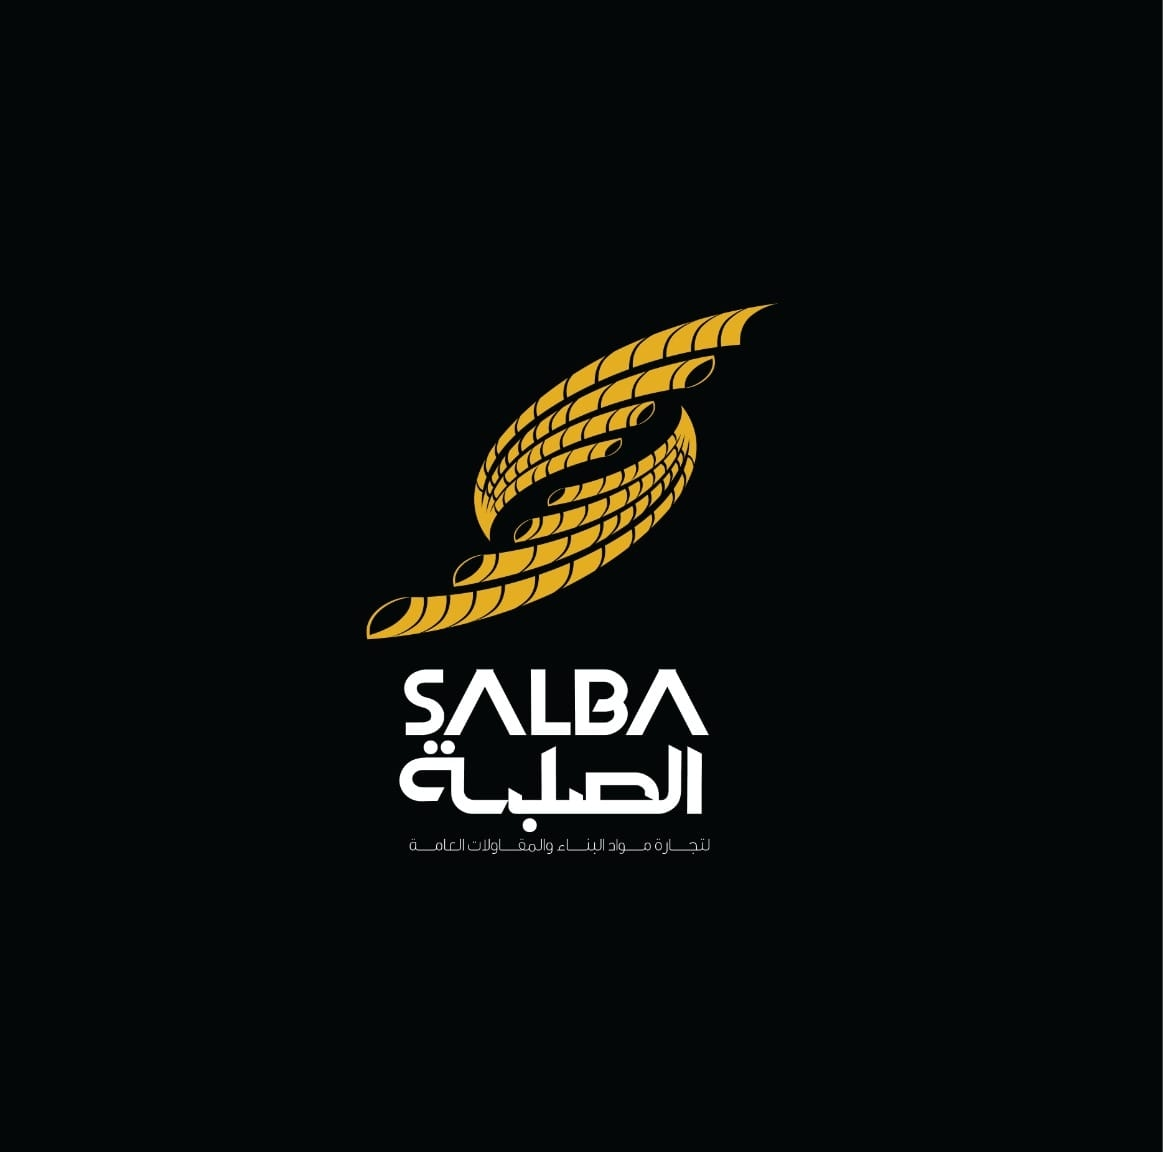 Alslaba steel company in Egypt logo including golden color Iron Rods above the word (salba - صلبة)